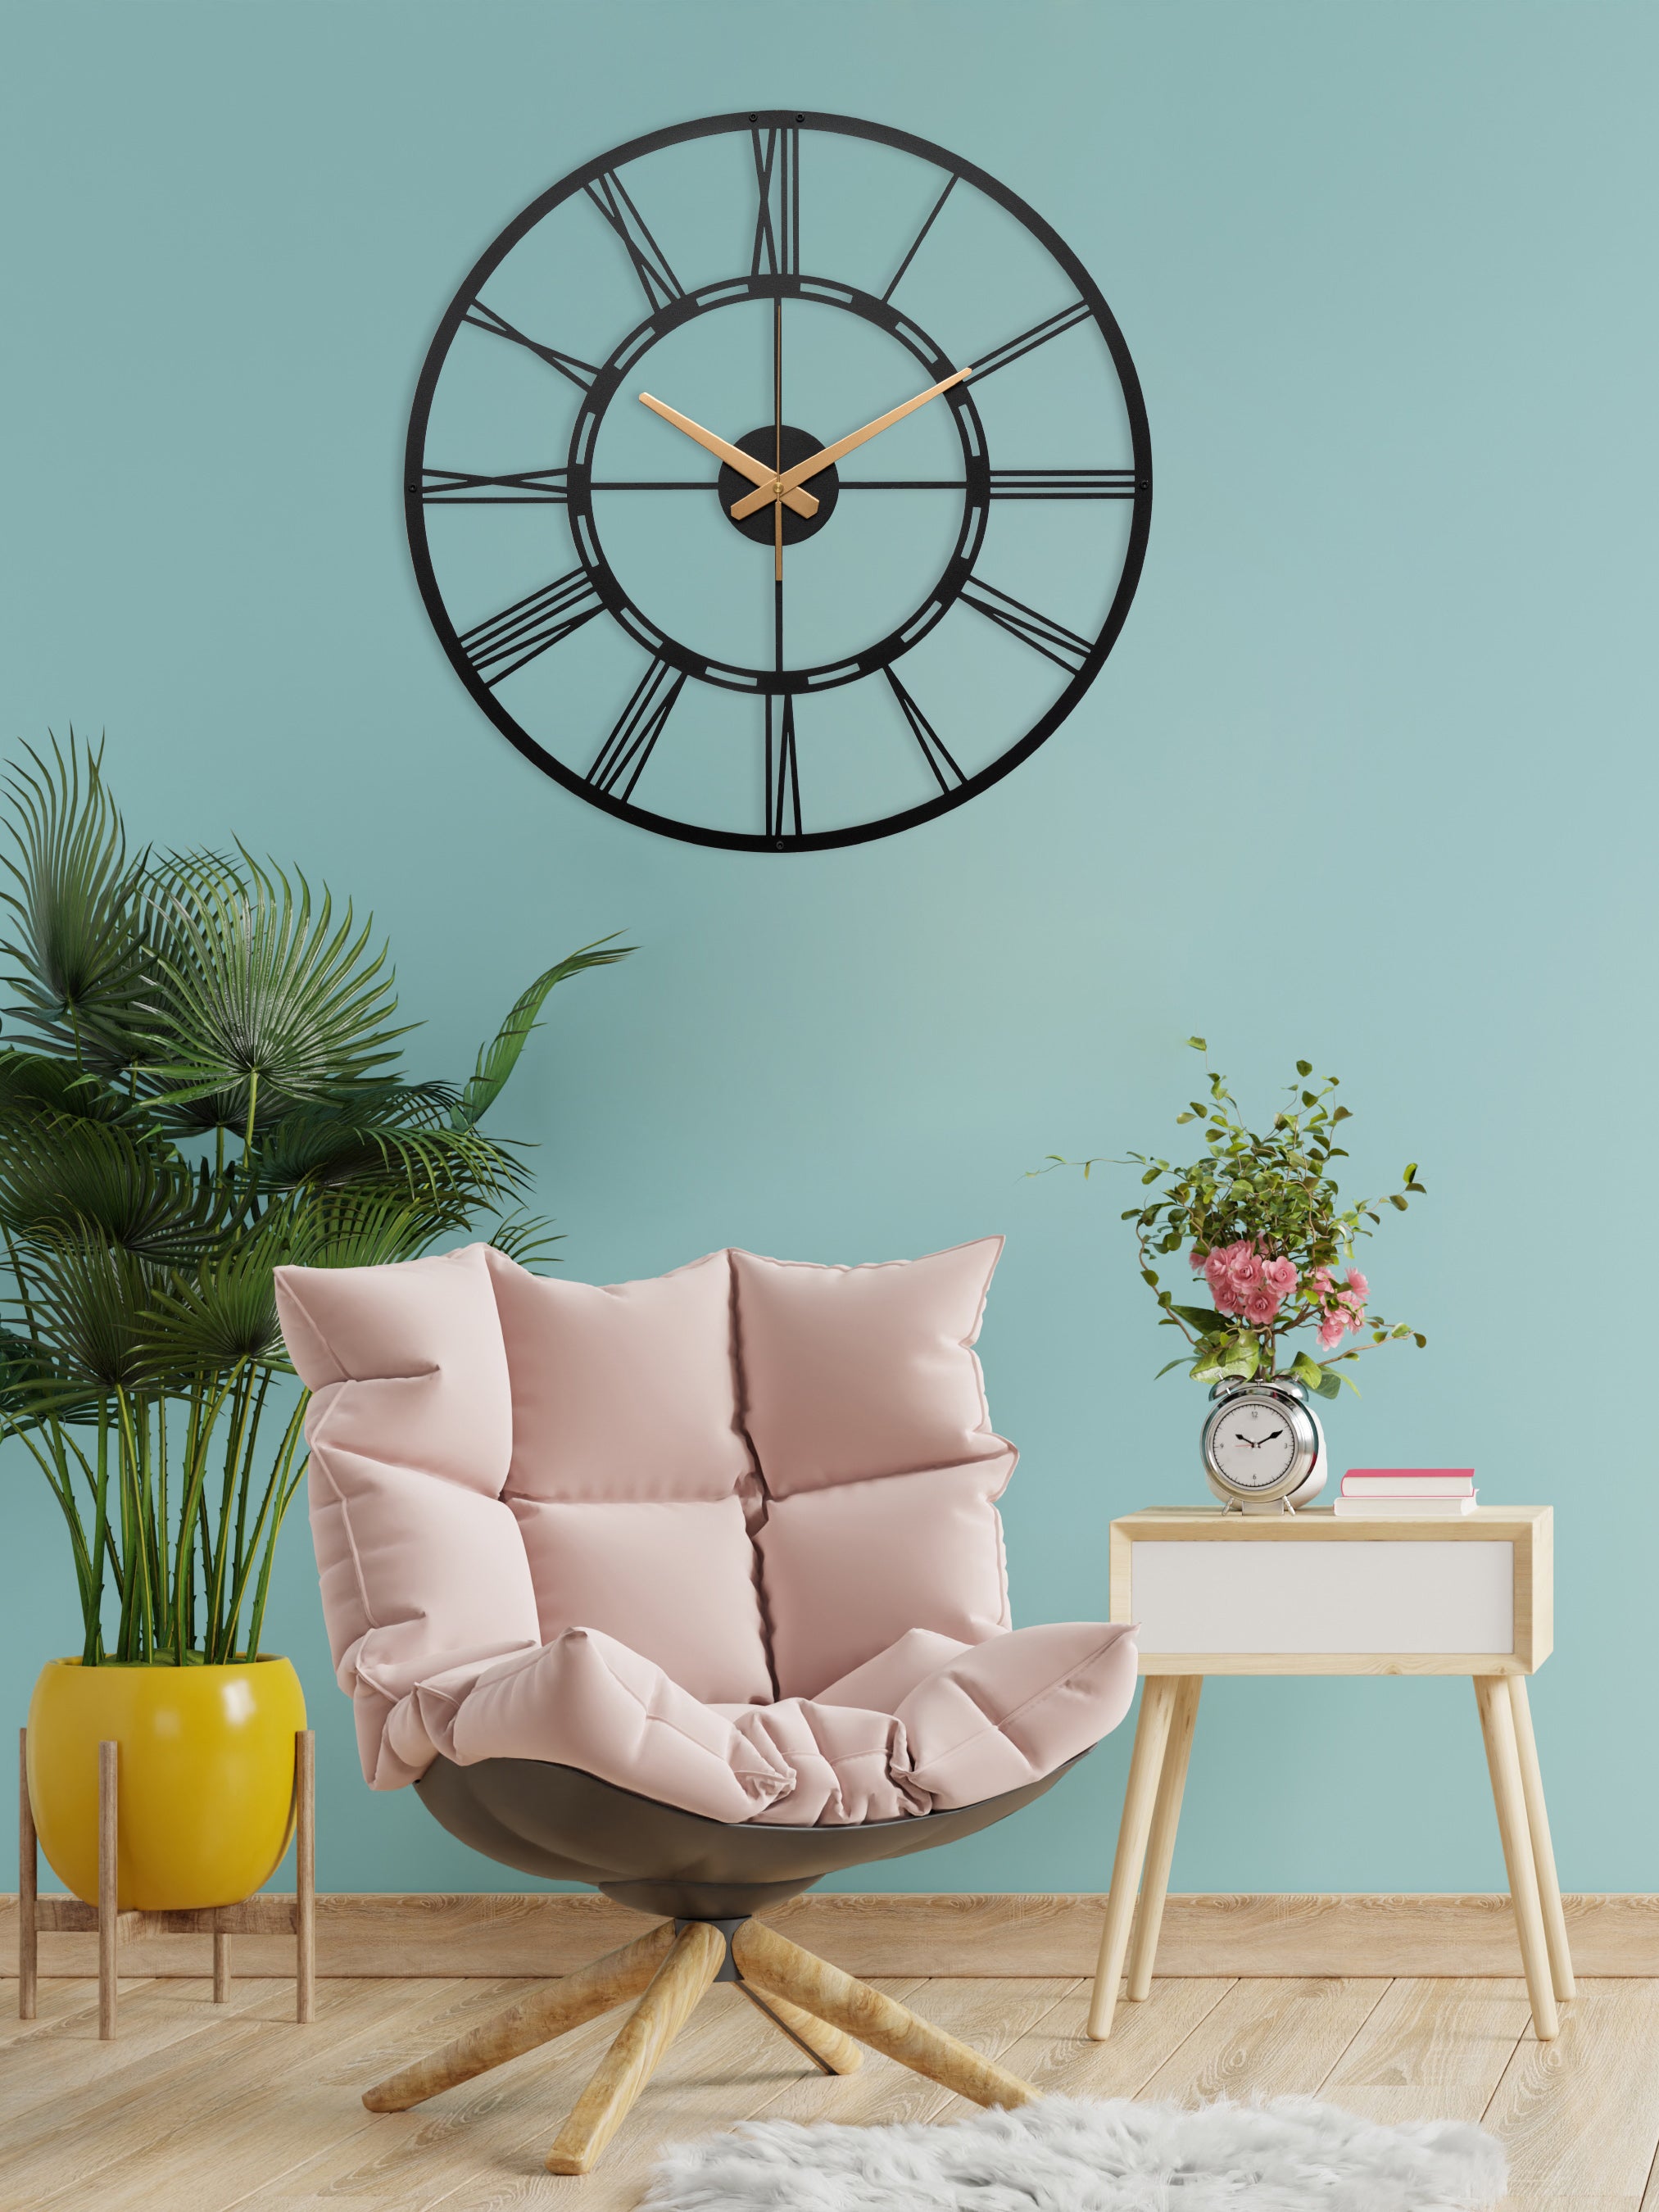 Unique Black Metal Wall Clock With White Roman Numbers